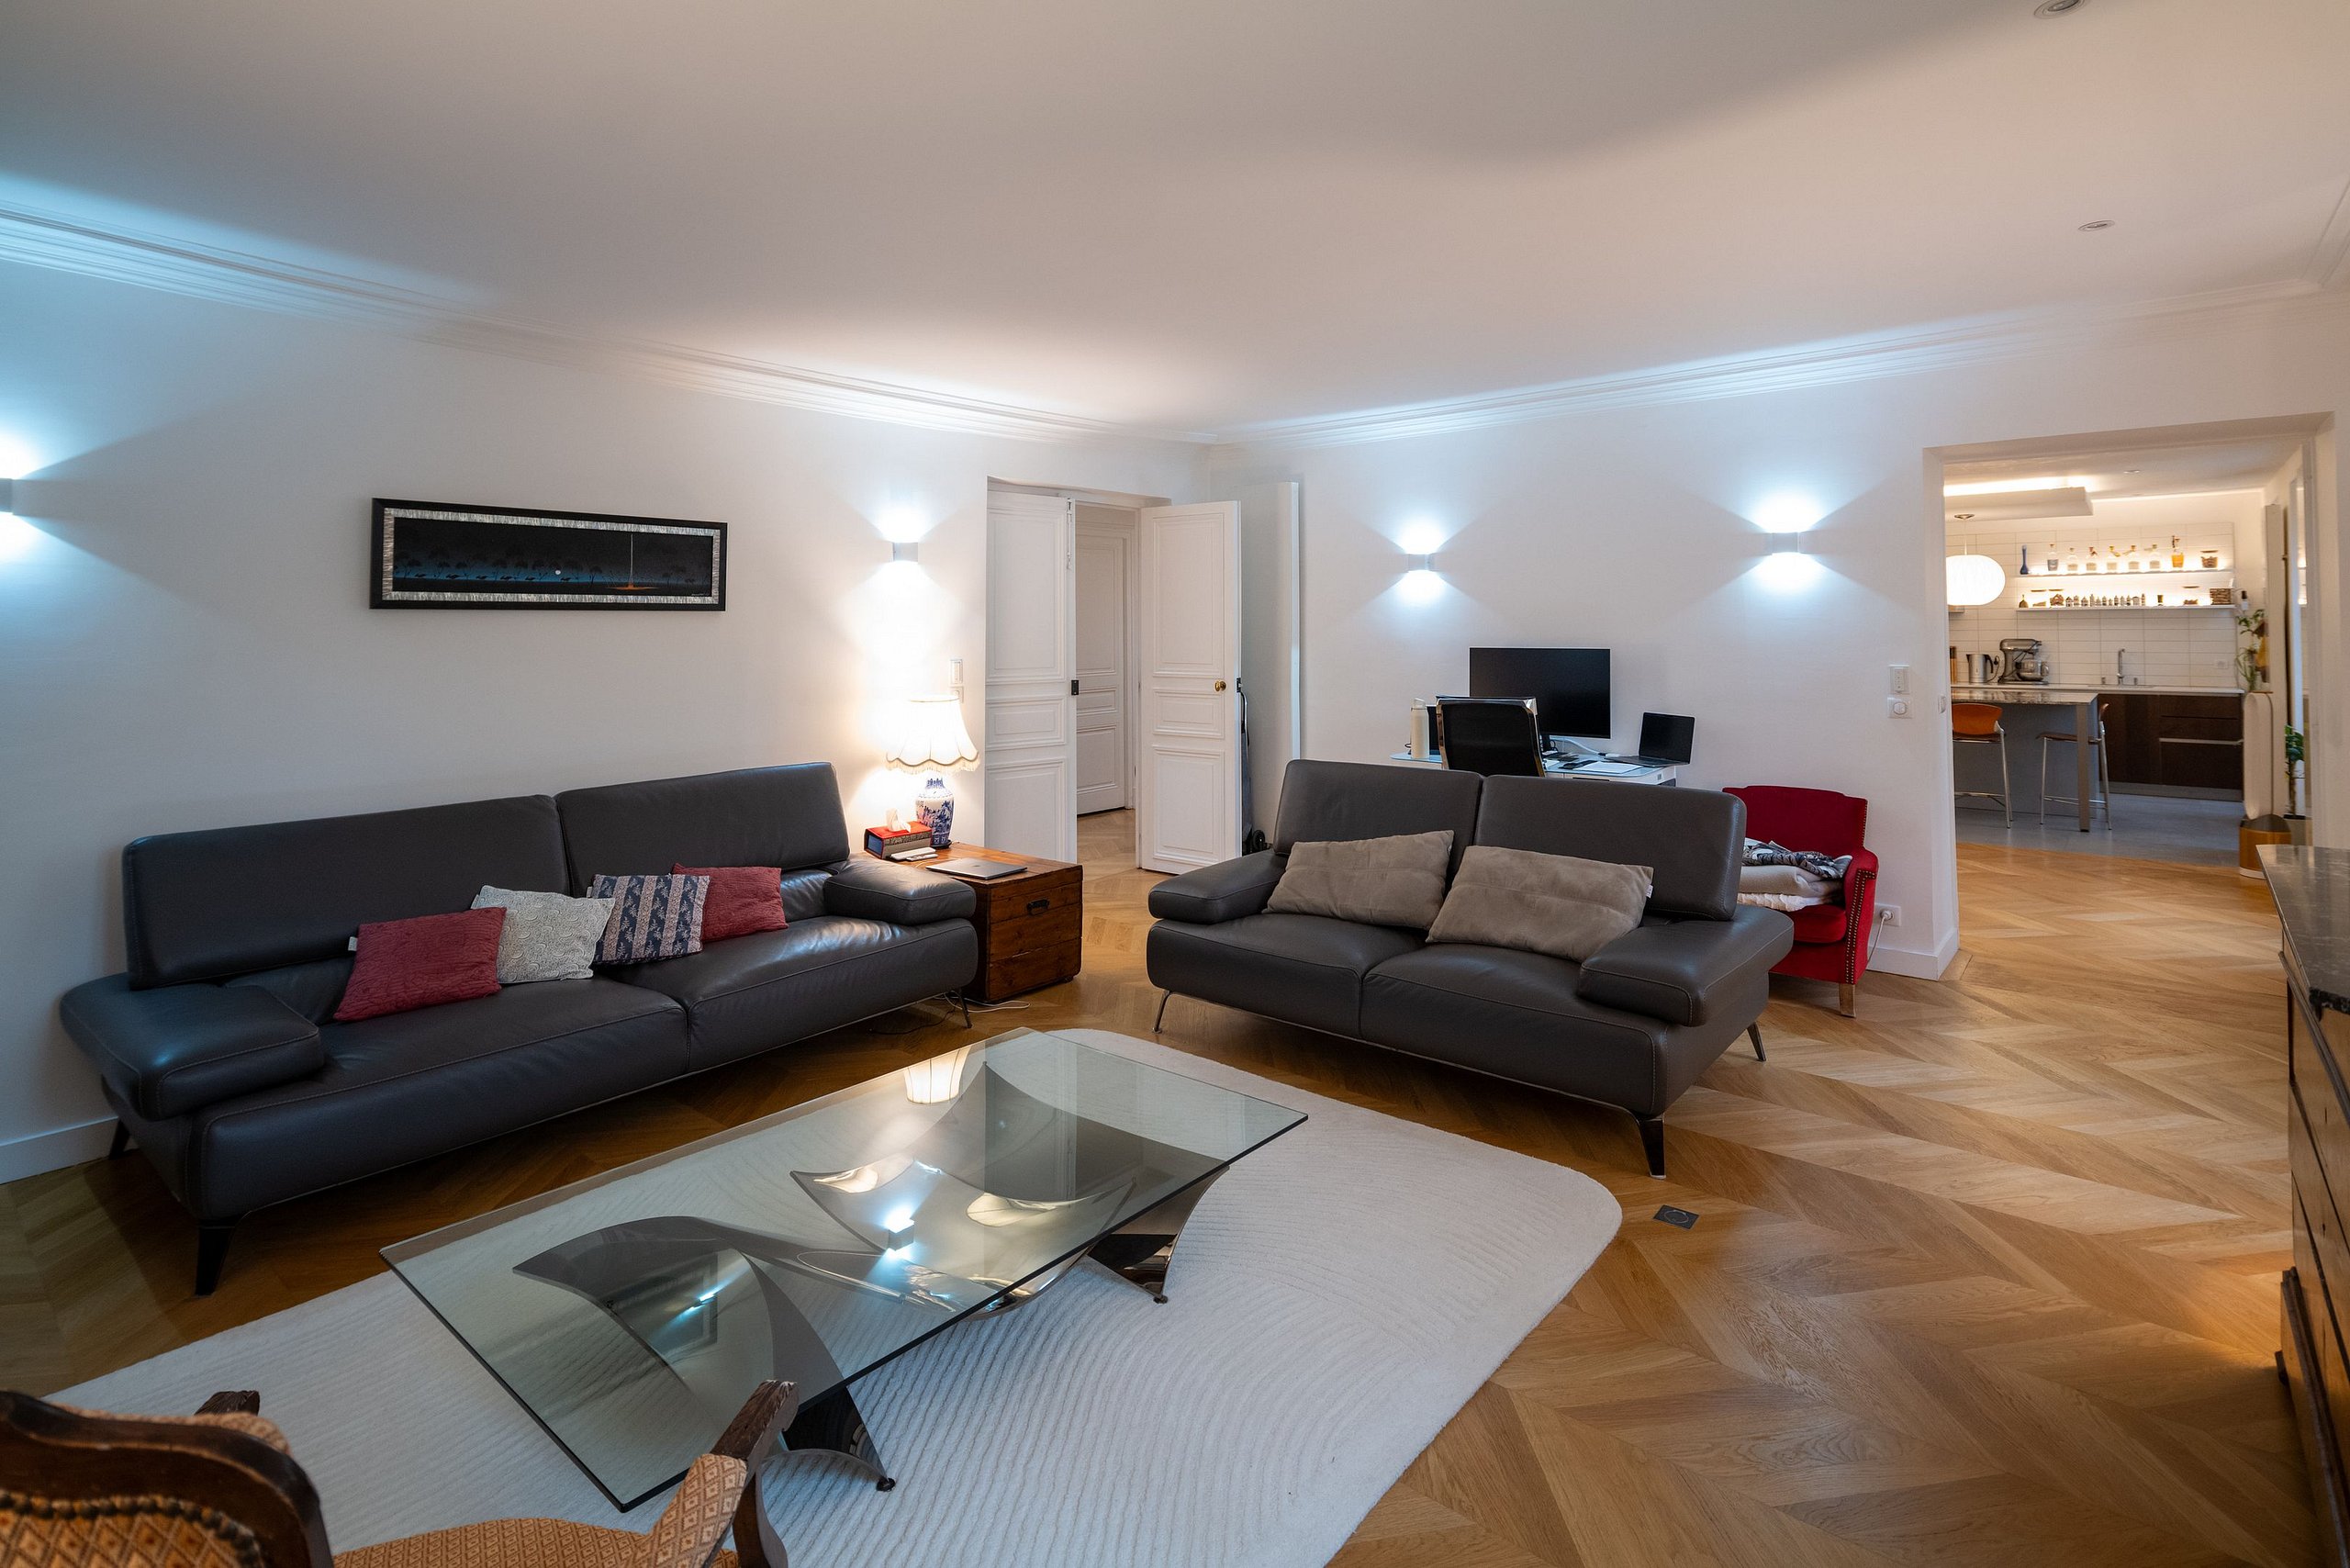 Property Image 2 - Idf119 - Apartment in Versailles for Olympics 2024